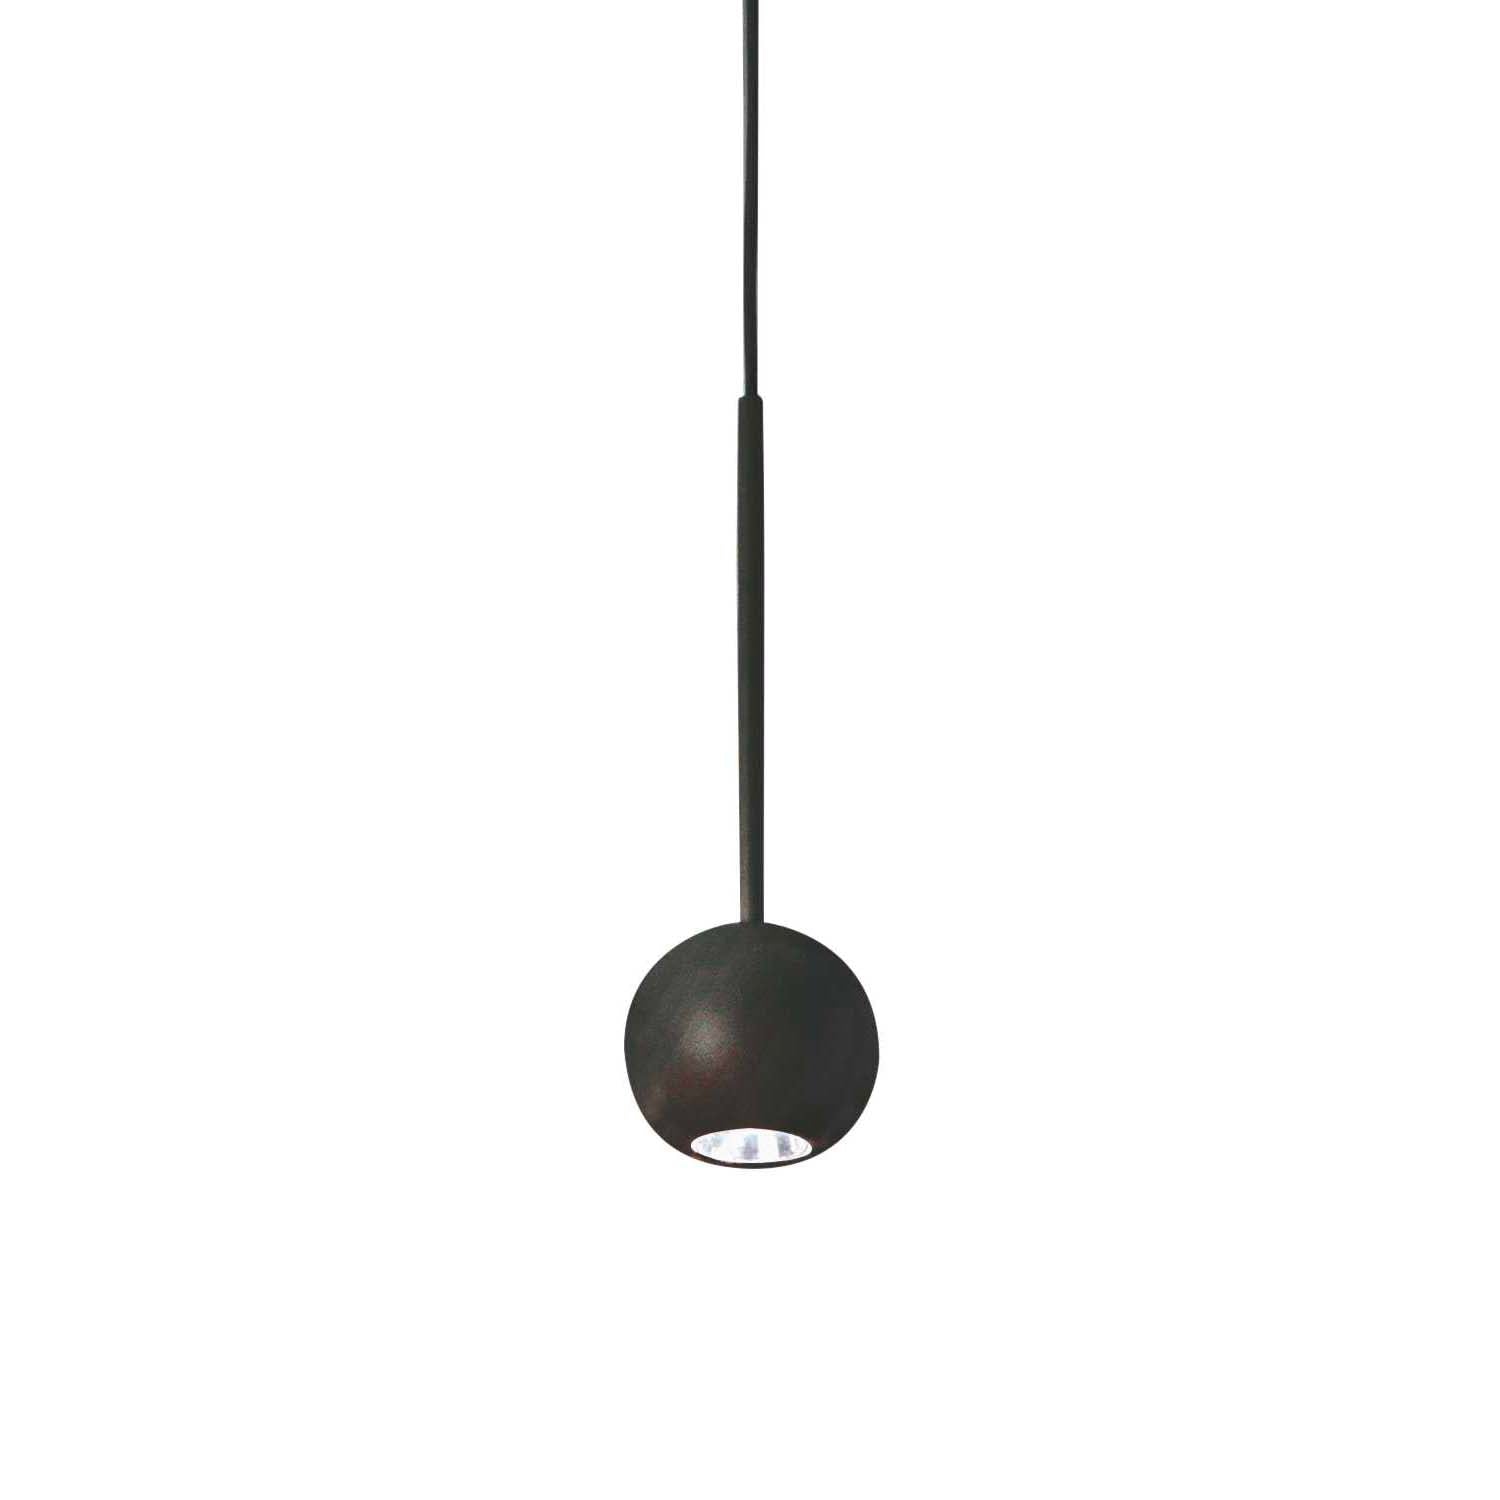 ARCHIMEDE - Small modern spot pendant light, different shapes